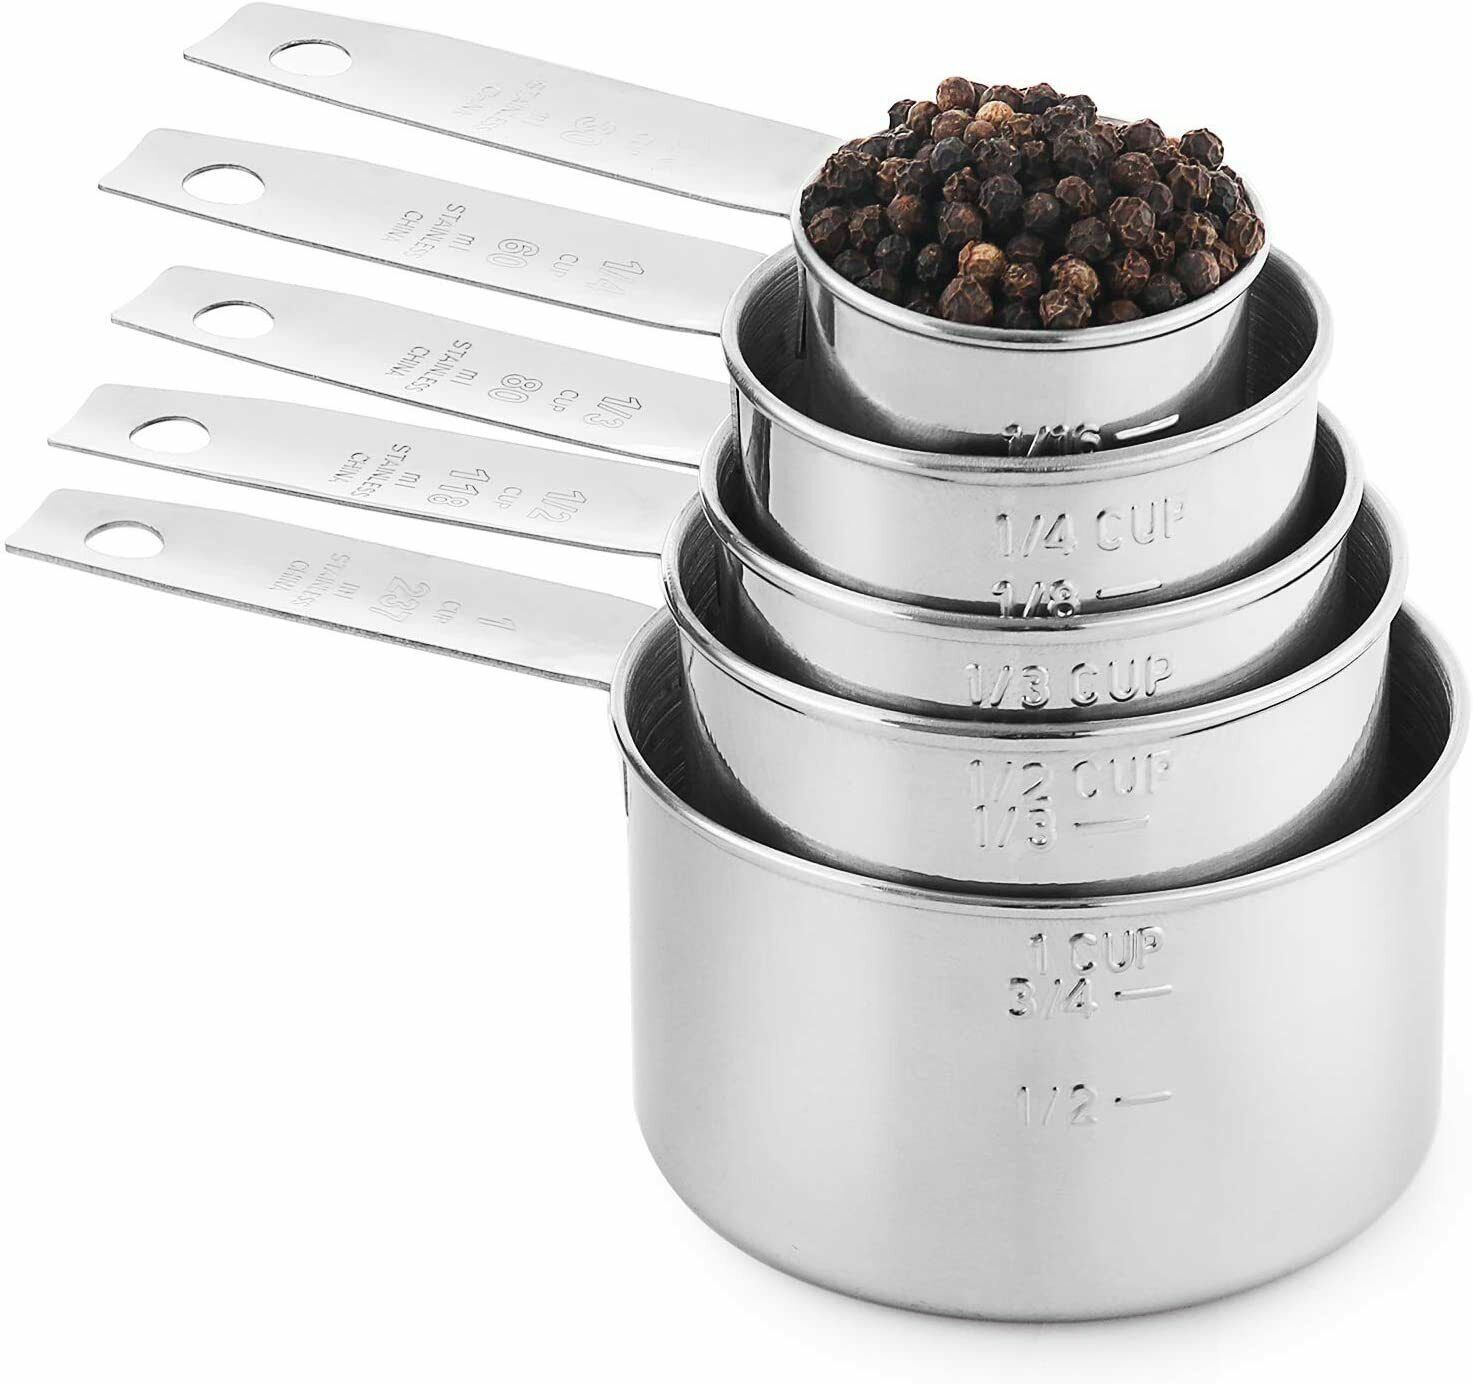 Stainless Steel Measuring Cups 5-piece Set,